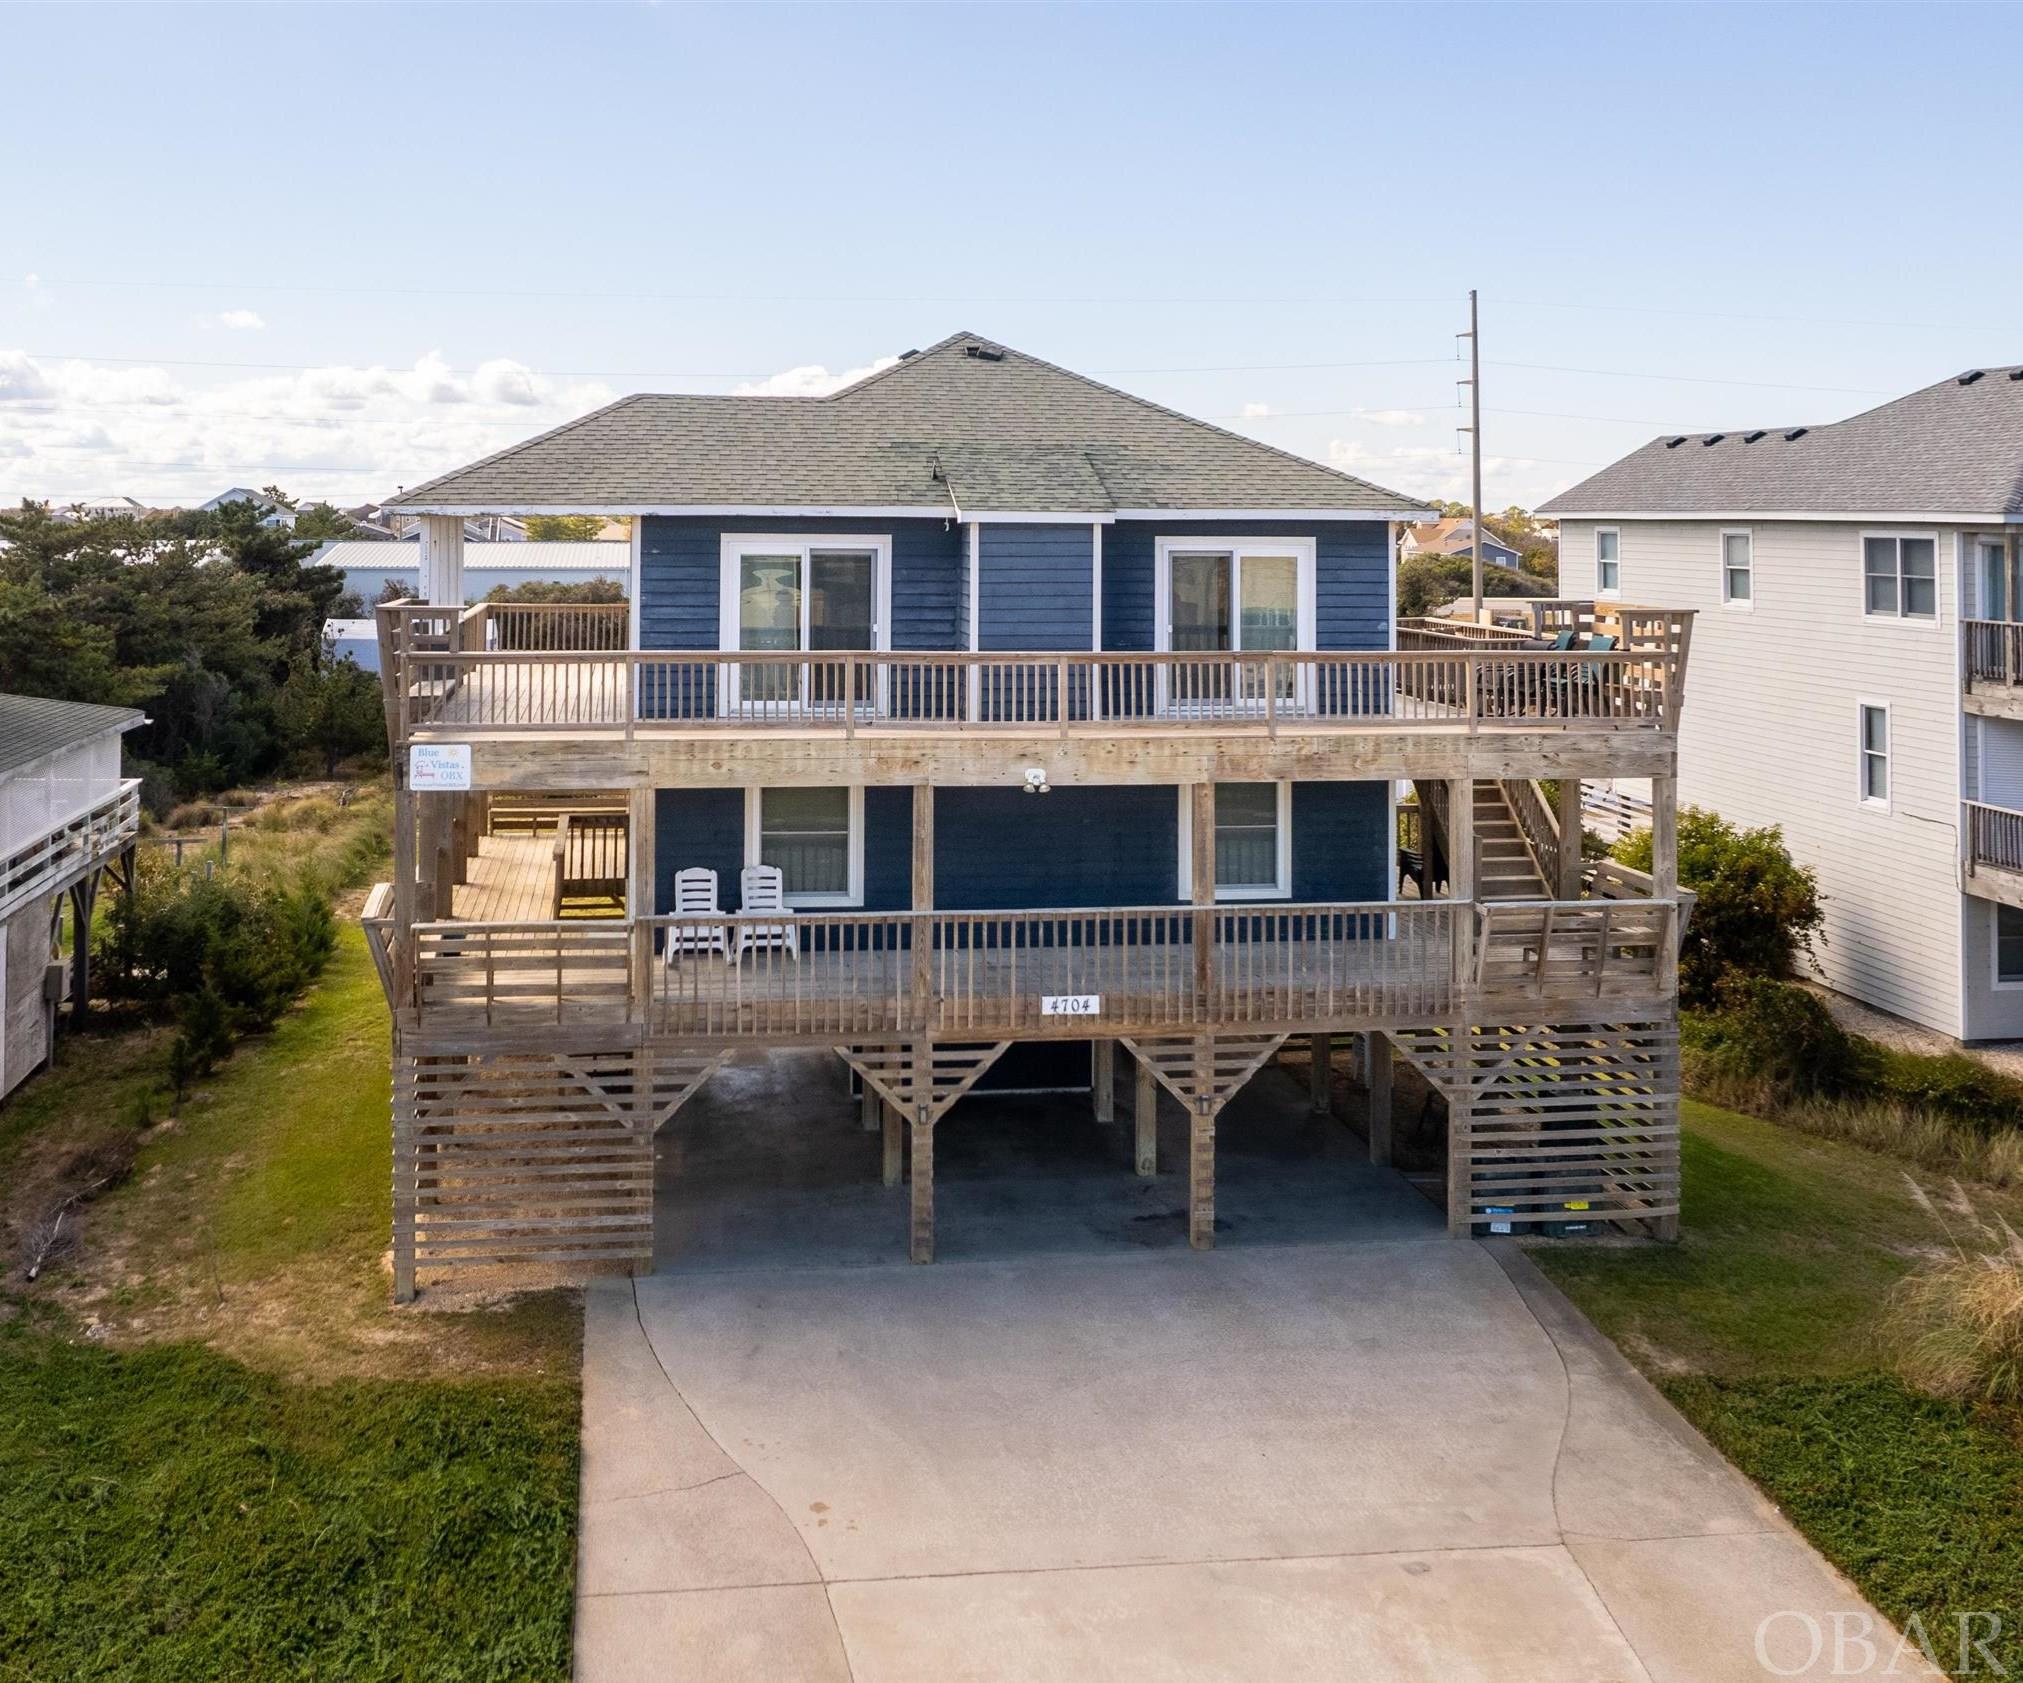 With it's stunning and expansive ocean views, large porches, oversized lot, proximity to beach access, and great rental numbers Blue Vistas exemplifies Nags Head charm!  The designated open space across the beach road provides an unobstructed view of the Atlantic Ocean. The upstairs great room is spacious with a white tongue and groove ceiling vaulted ceiling, which gives a modern feel to the traditional Nags Head beach home. In 2017 new flooring was added.  The exterior was painted in 2016 and all new hurricane windows and slider doors were added (minus two sliders on the south side of the home).  The home is set as a 4 bedroom, but the septic is rated for a 5-bedroom, offering the option for future potential expansion. At 13,000 sq/ft the lot is larger than most normal semi-oceanfront homes, with room to add a pool.  The large driveway can accommodate more than 6 cars and allows for turning around, so that departure is headfirst on to beach road.  Centrally located between Jockey's Ridge State Park and Nags Head Golf Links, and some of the best OBX restaurants and shops, all while having two public beach accesses within 1/4 mile. Proven rental history with room to grow! Schedule your appointment to see this home today.